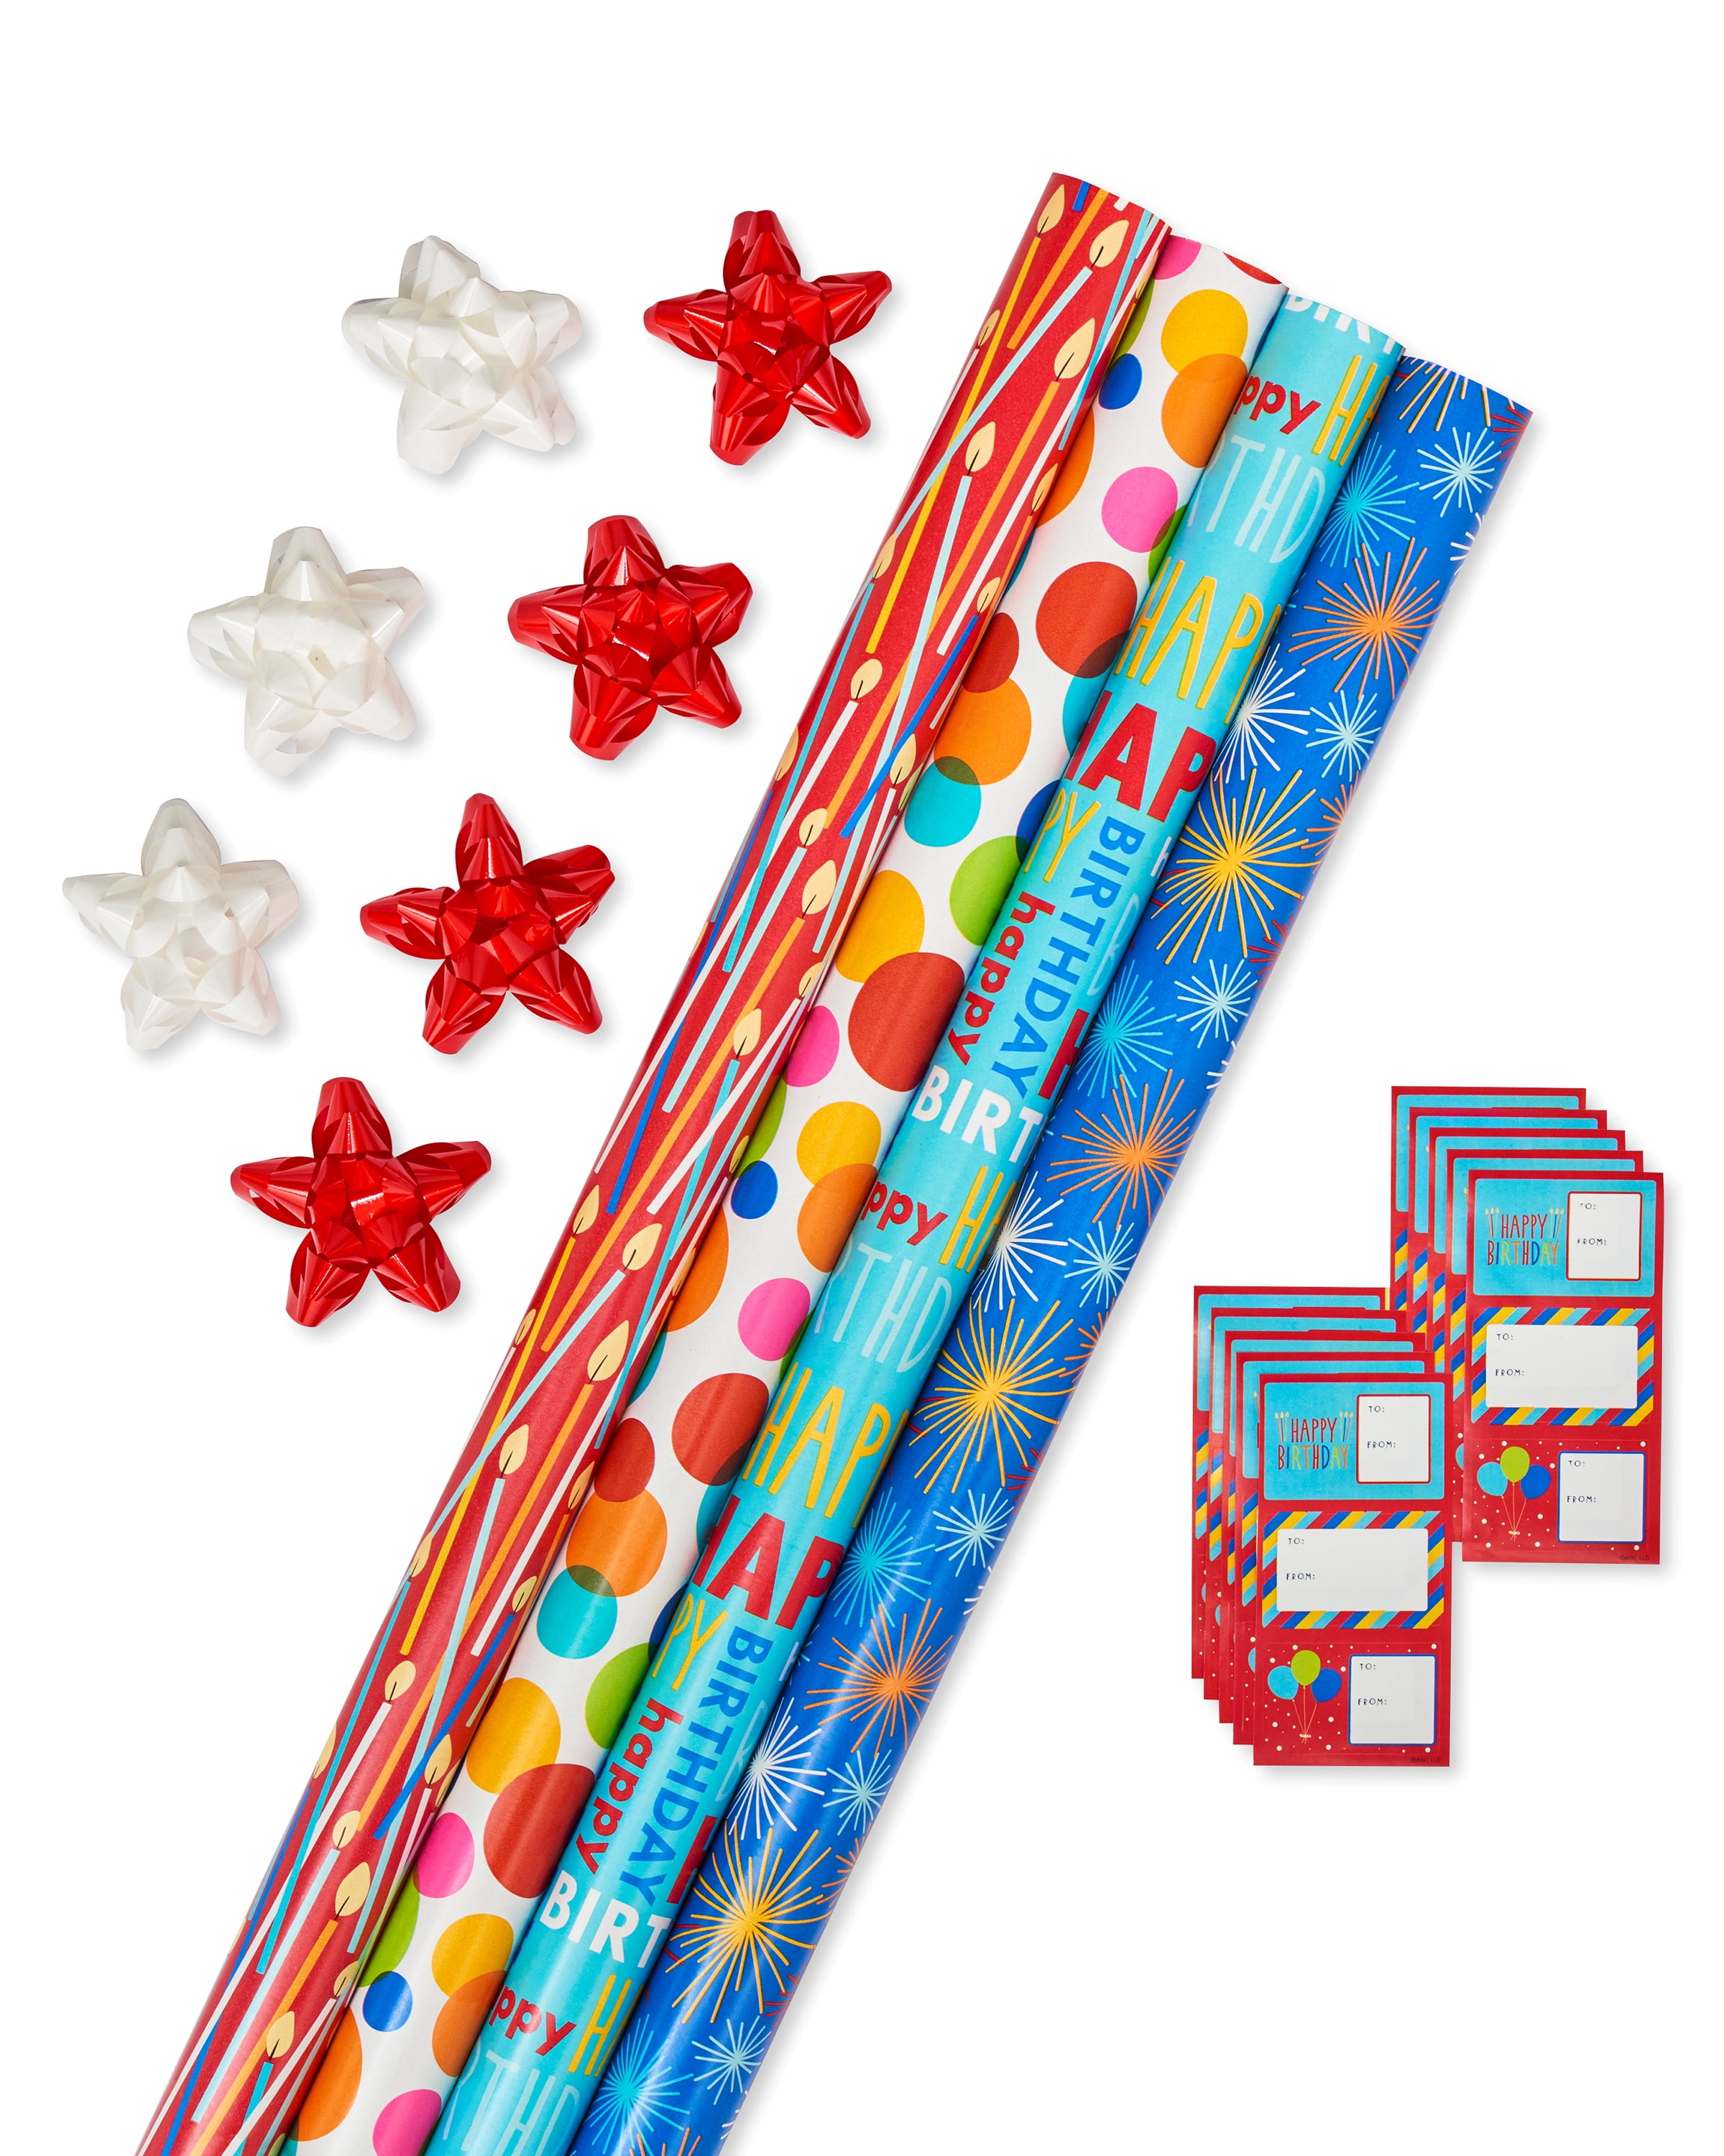 american-greetings-birthday-wrapping-paper-kit-with-gridlines-bows-and